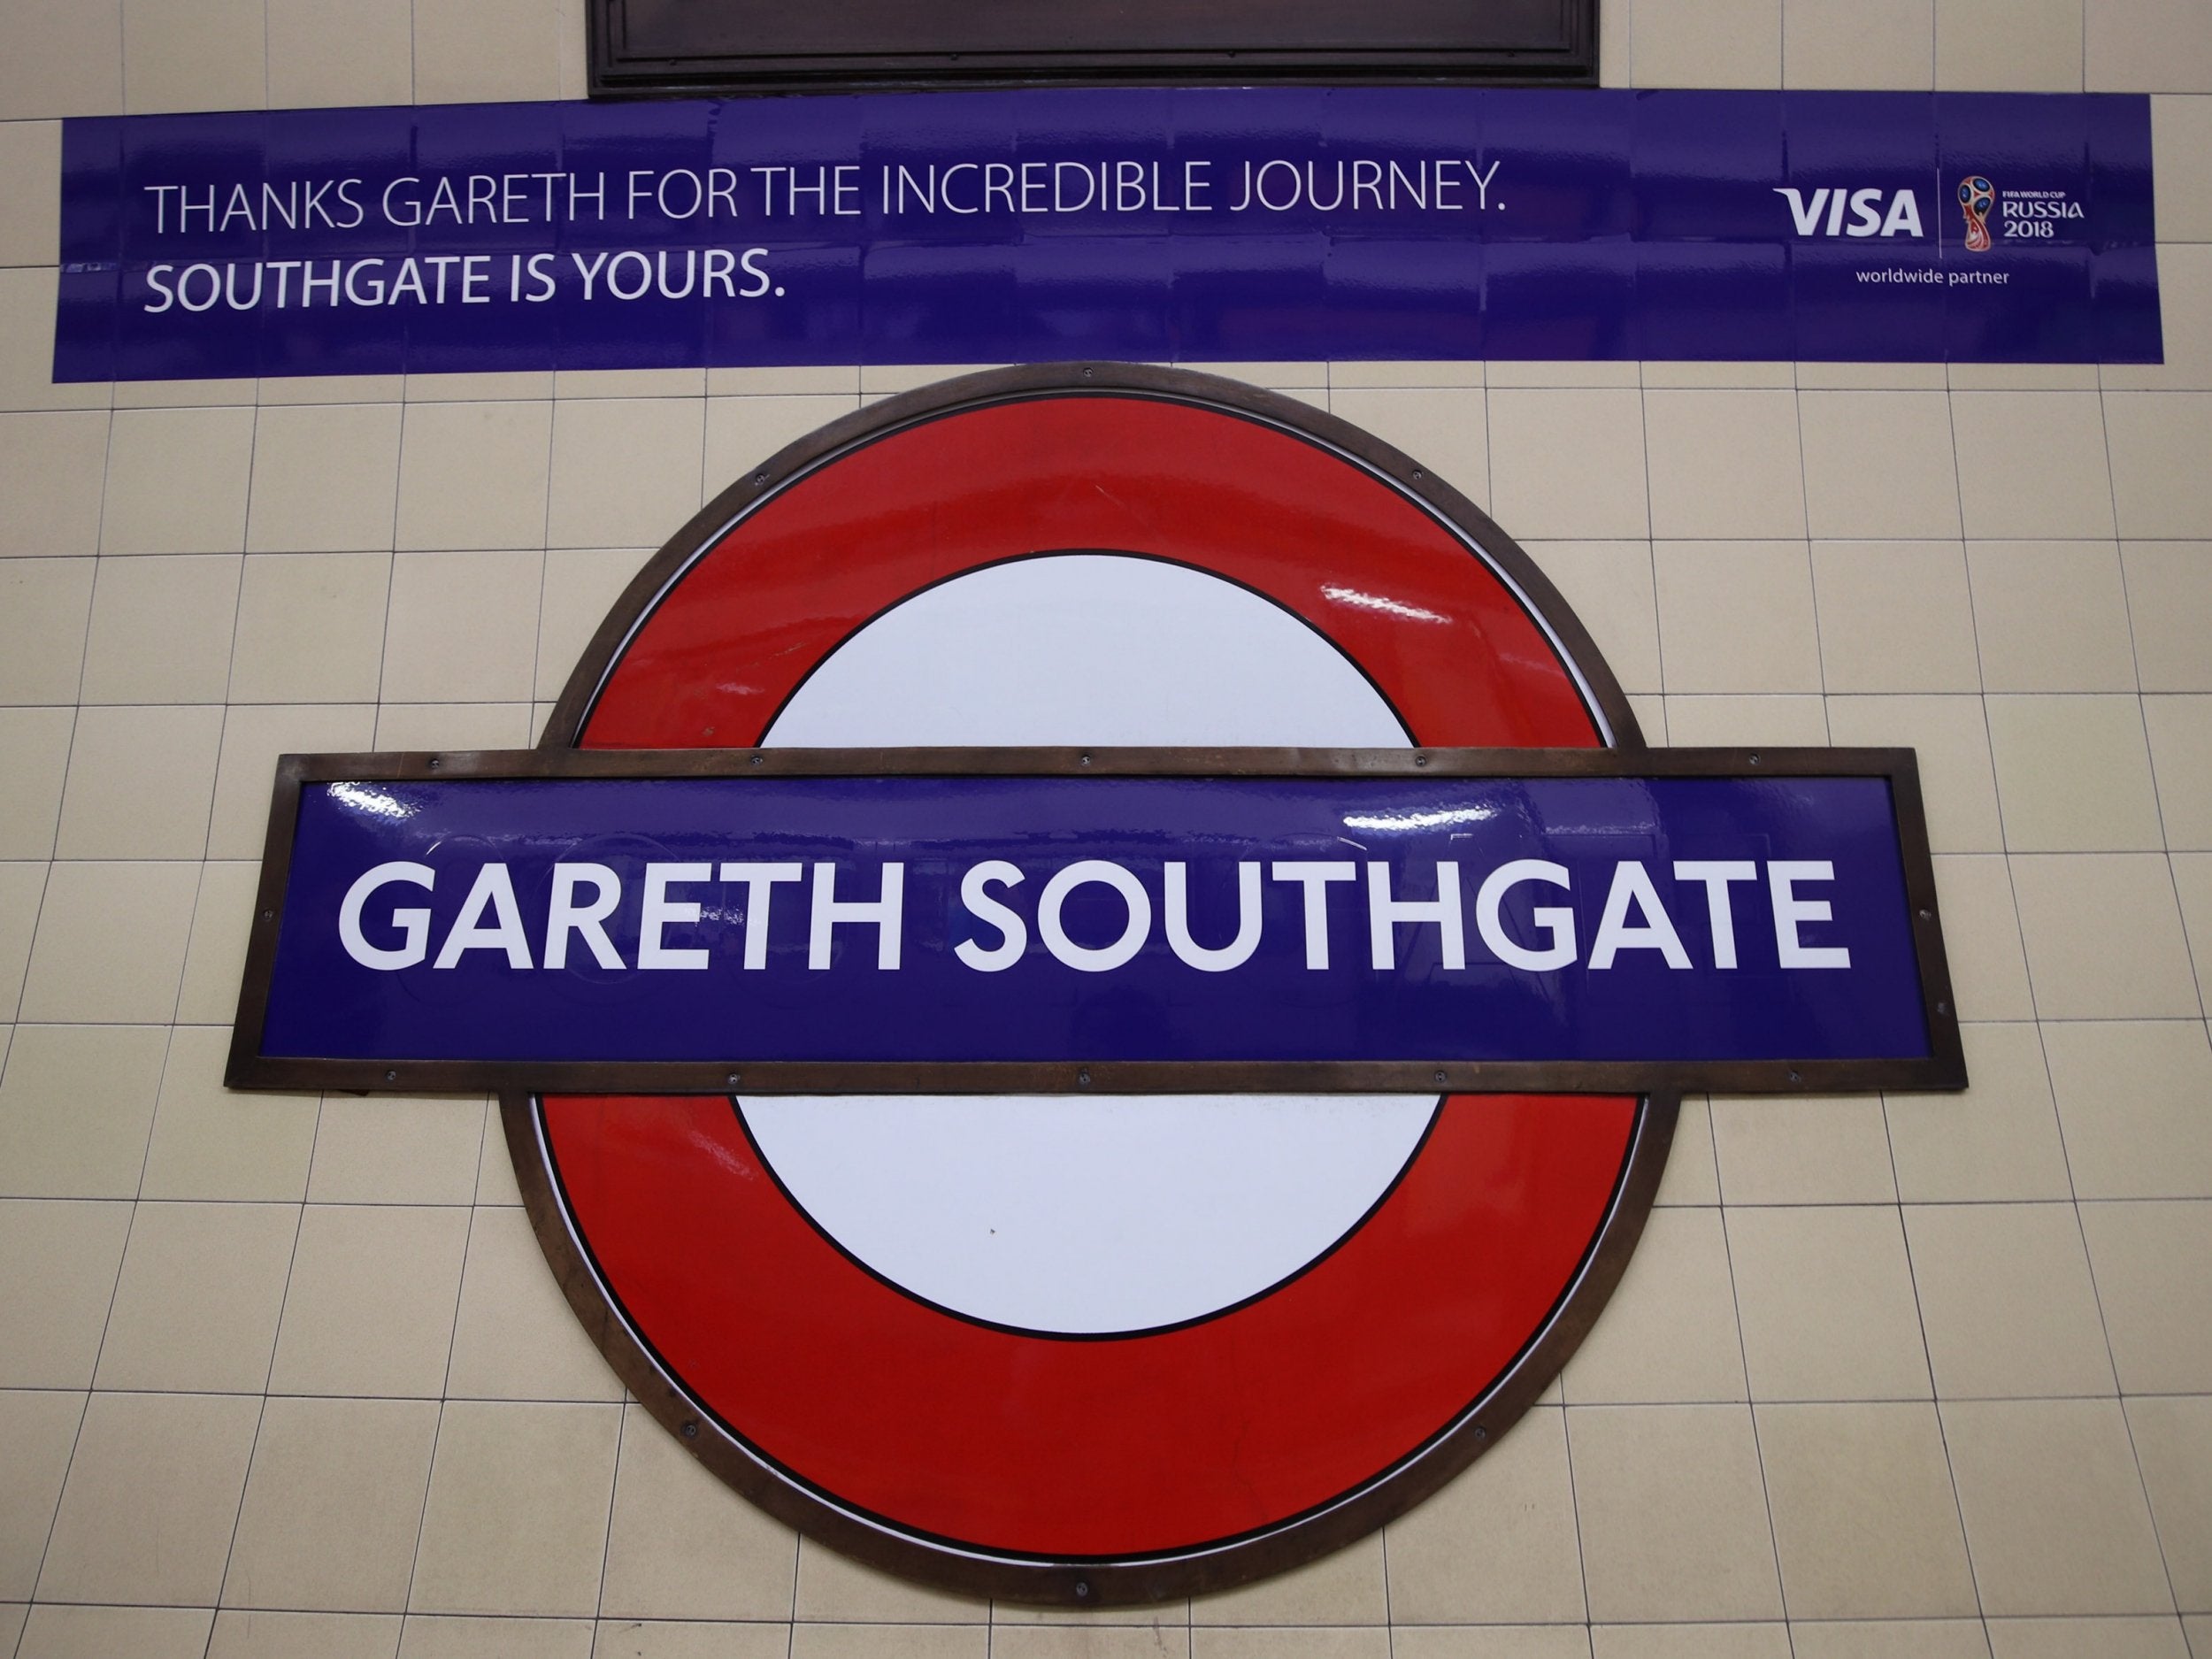 TfL have changed all the signage at the station to honour the England manager’s remarkable World Cup campaign